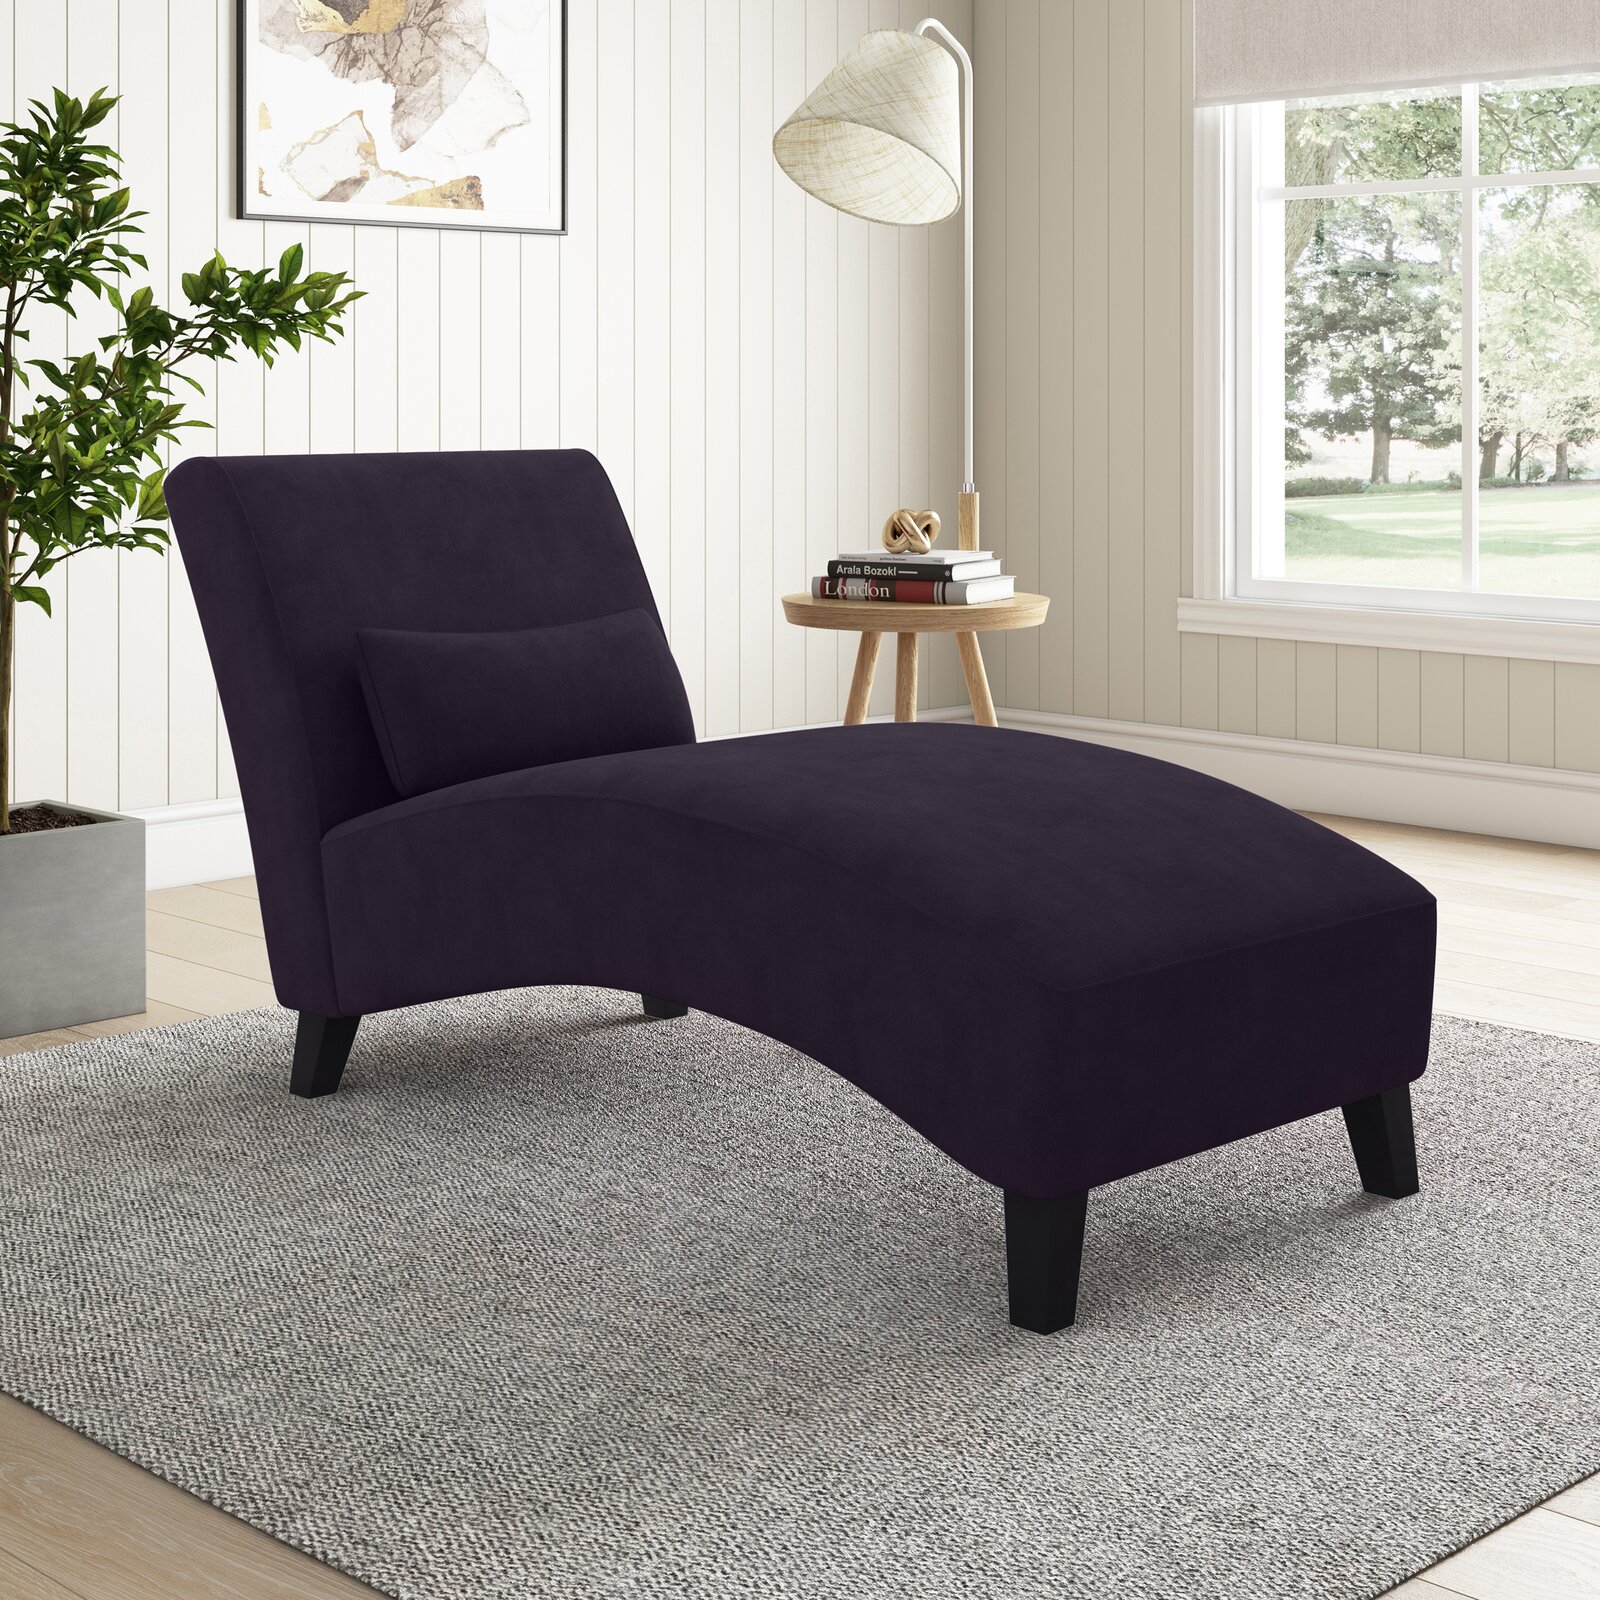 Braemar Armless Chaise Lounge, Weight Capacity: 300 lb., : 32.5'' H x 26.75'' W x 61'' L - image 3 of 5